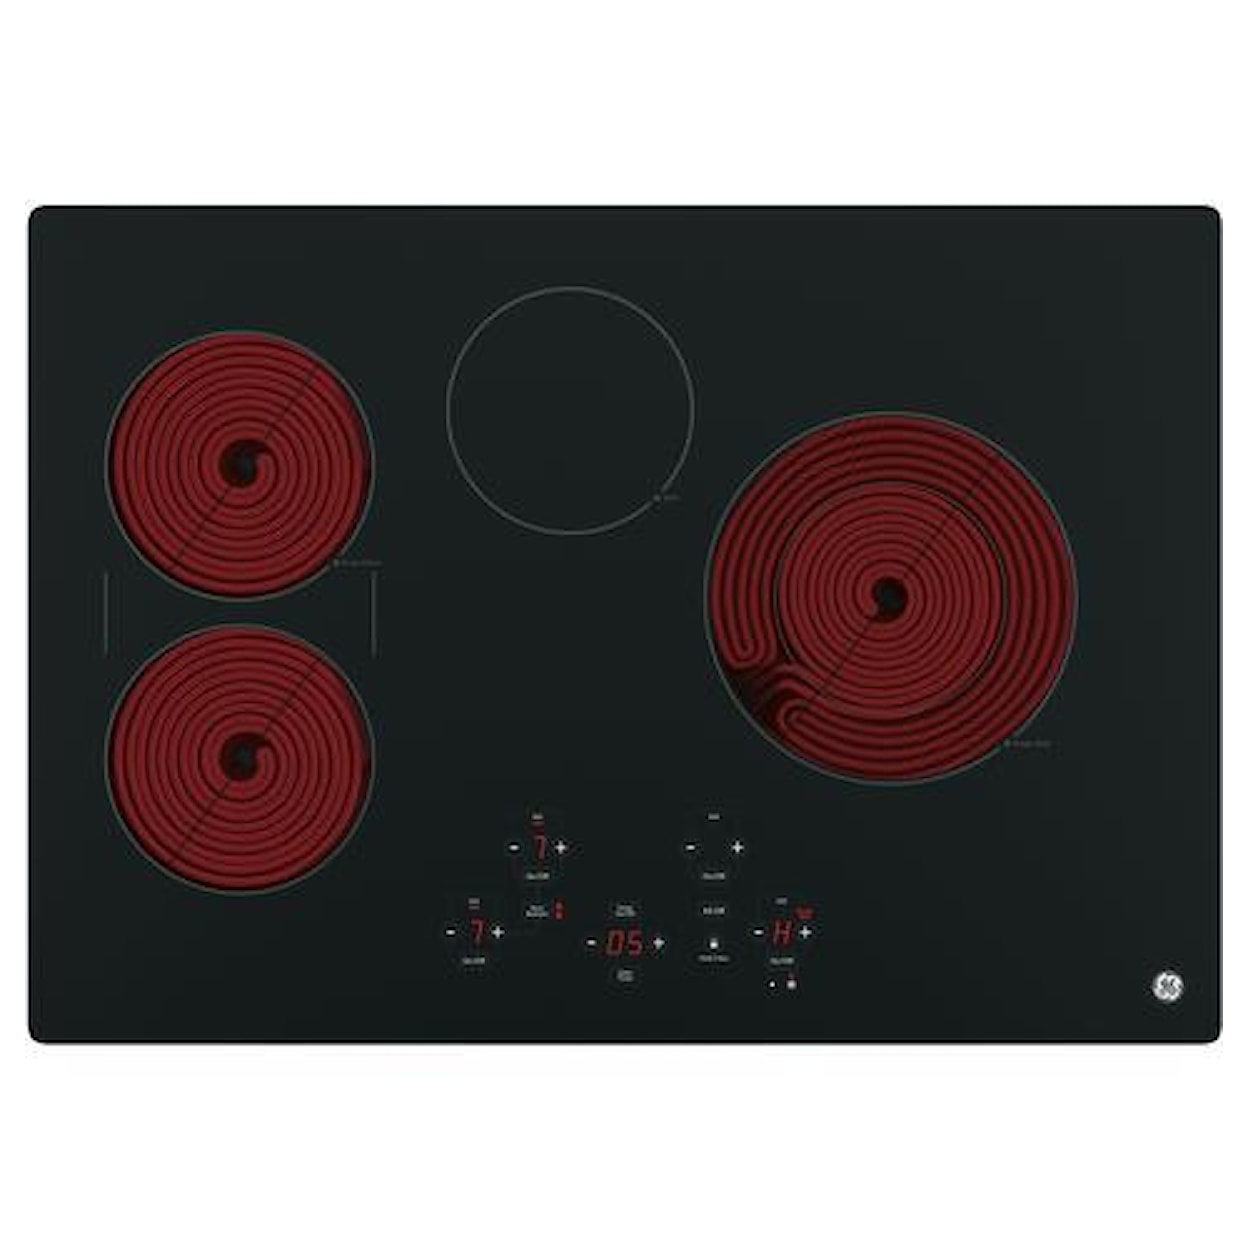 GE Appliances GE Electric Cooktops 30" Touch Control Electric Cooktop